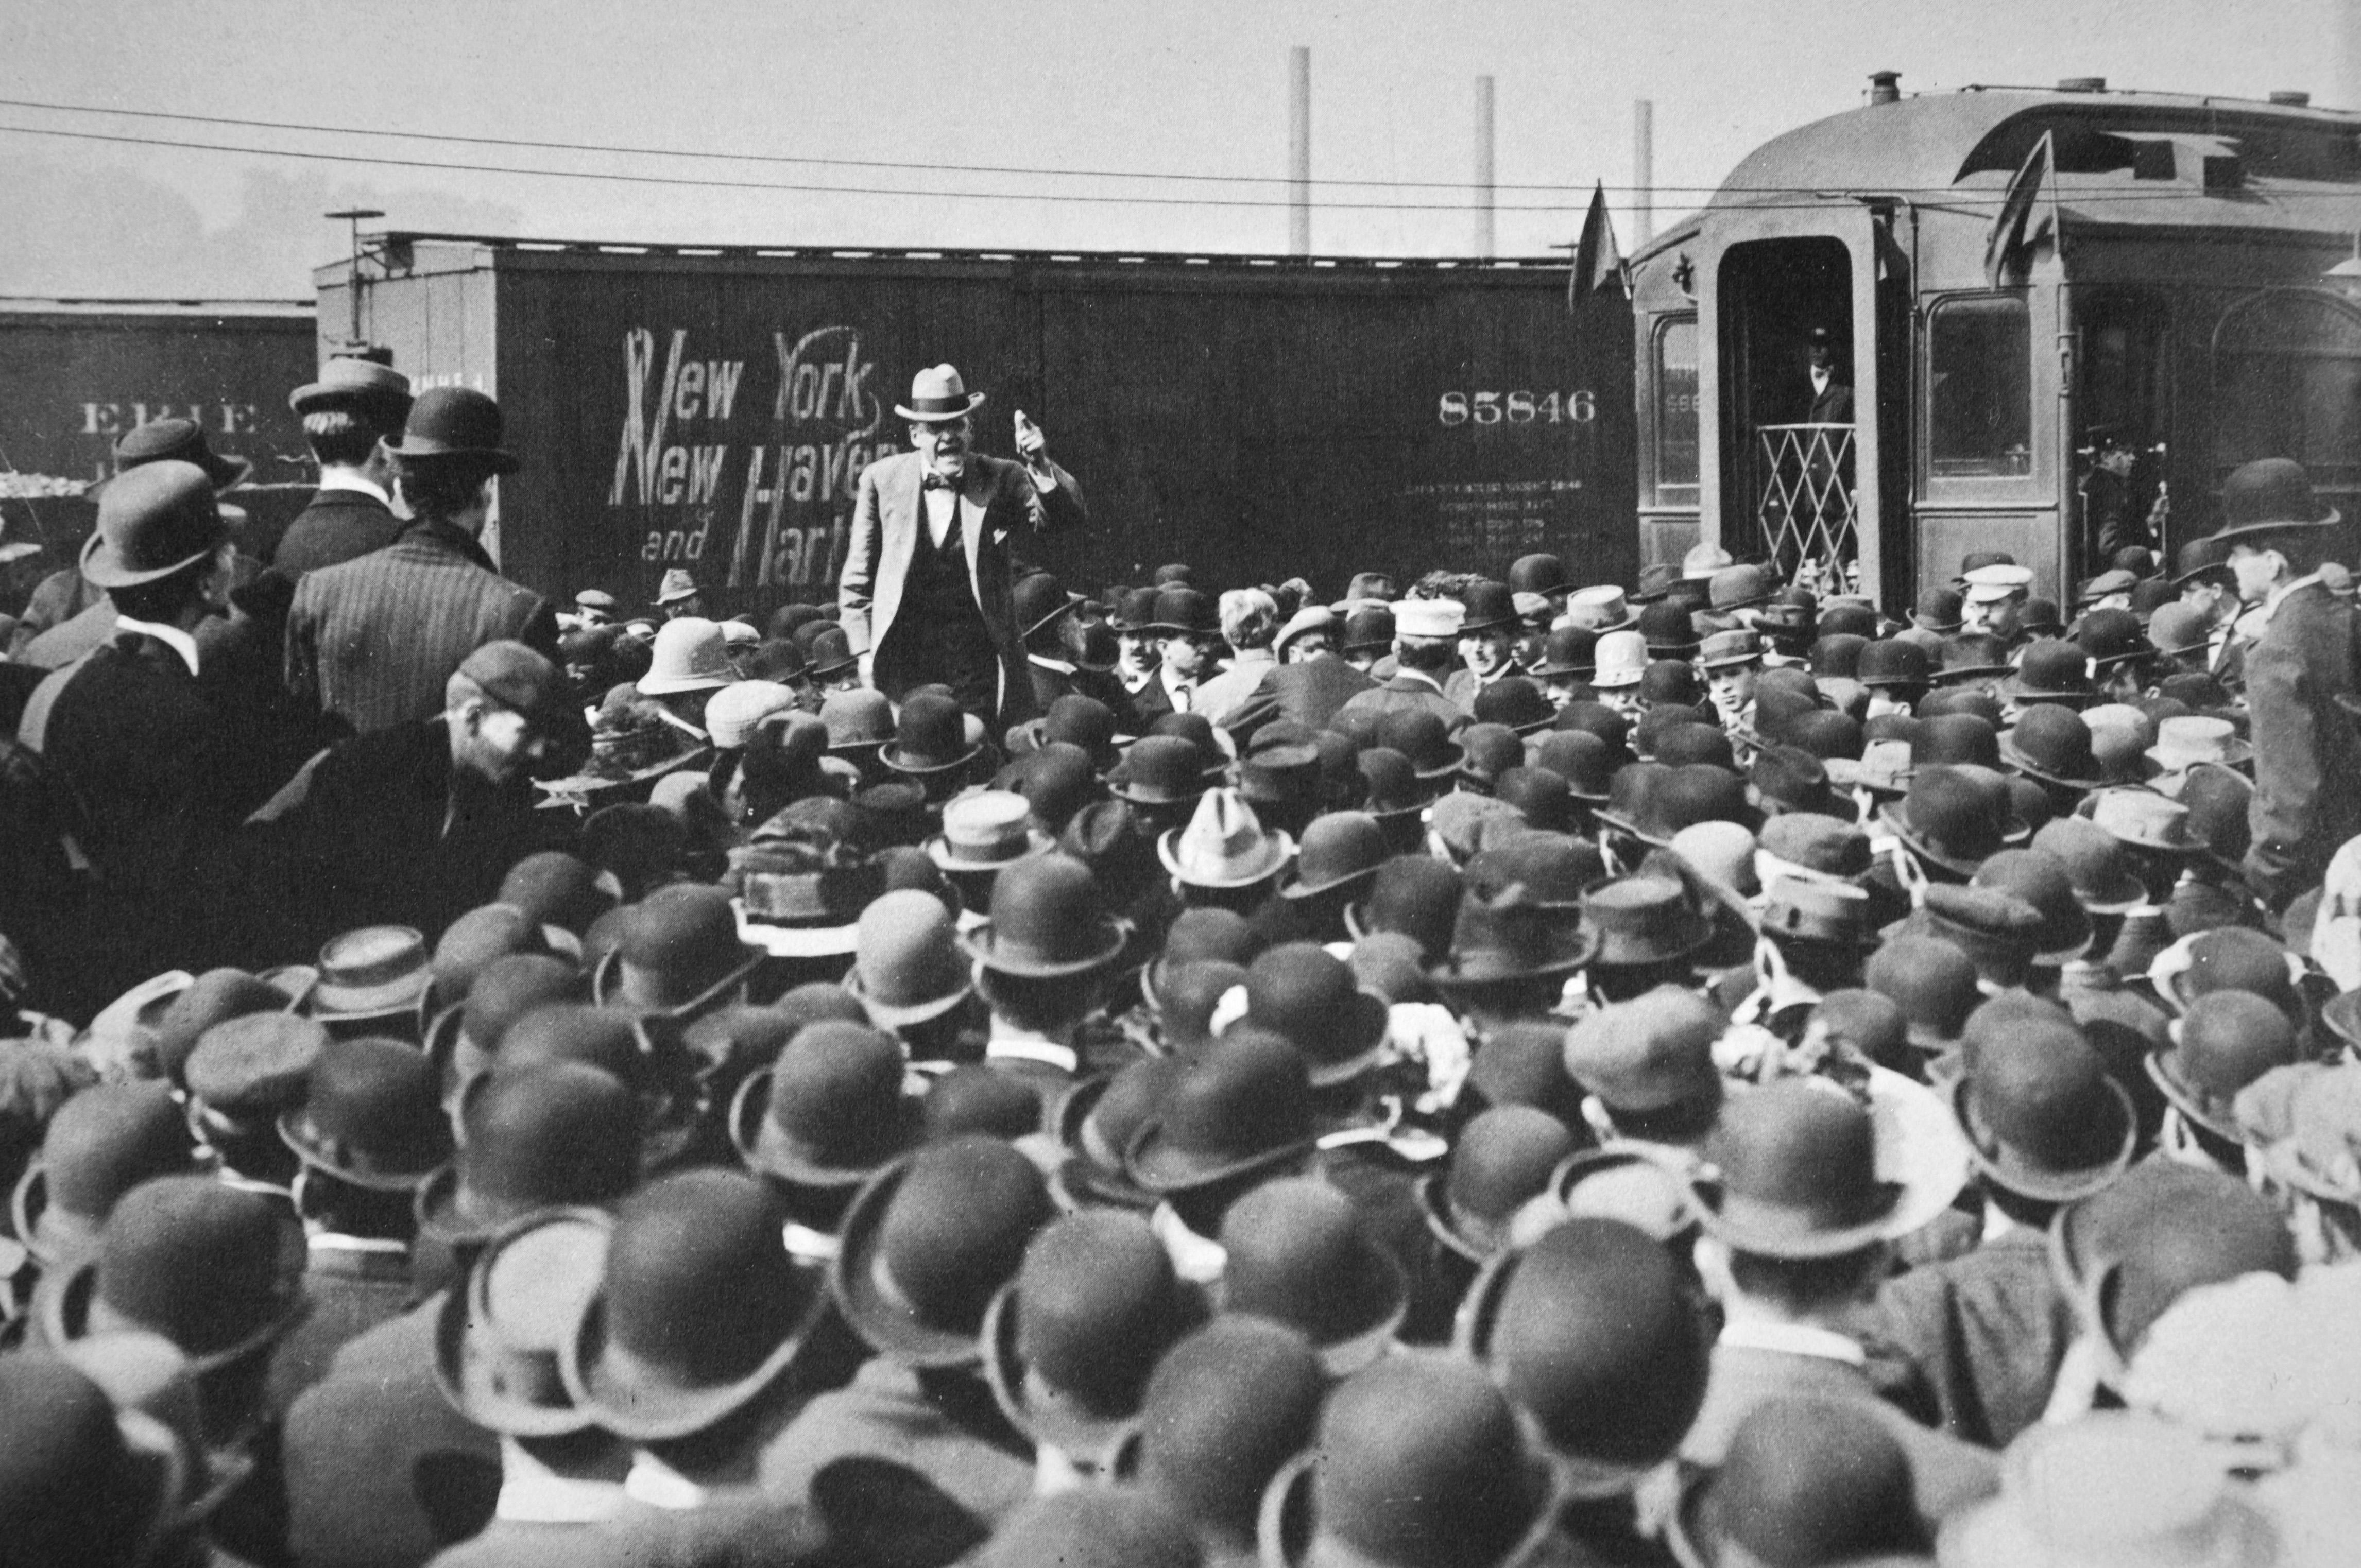 Eugene Victor Debs, American Union leader, addressing a crowd, 20th century. Debs ran for President of the United States on behalf of the Social Democratic Party in 1900, and the Socialist Party of America in 1904, 1908, 1912, and 1920. Artist Unknown. (Photo: Historica Graphica Collection/Heritage Images/Getty Images)